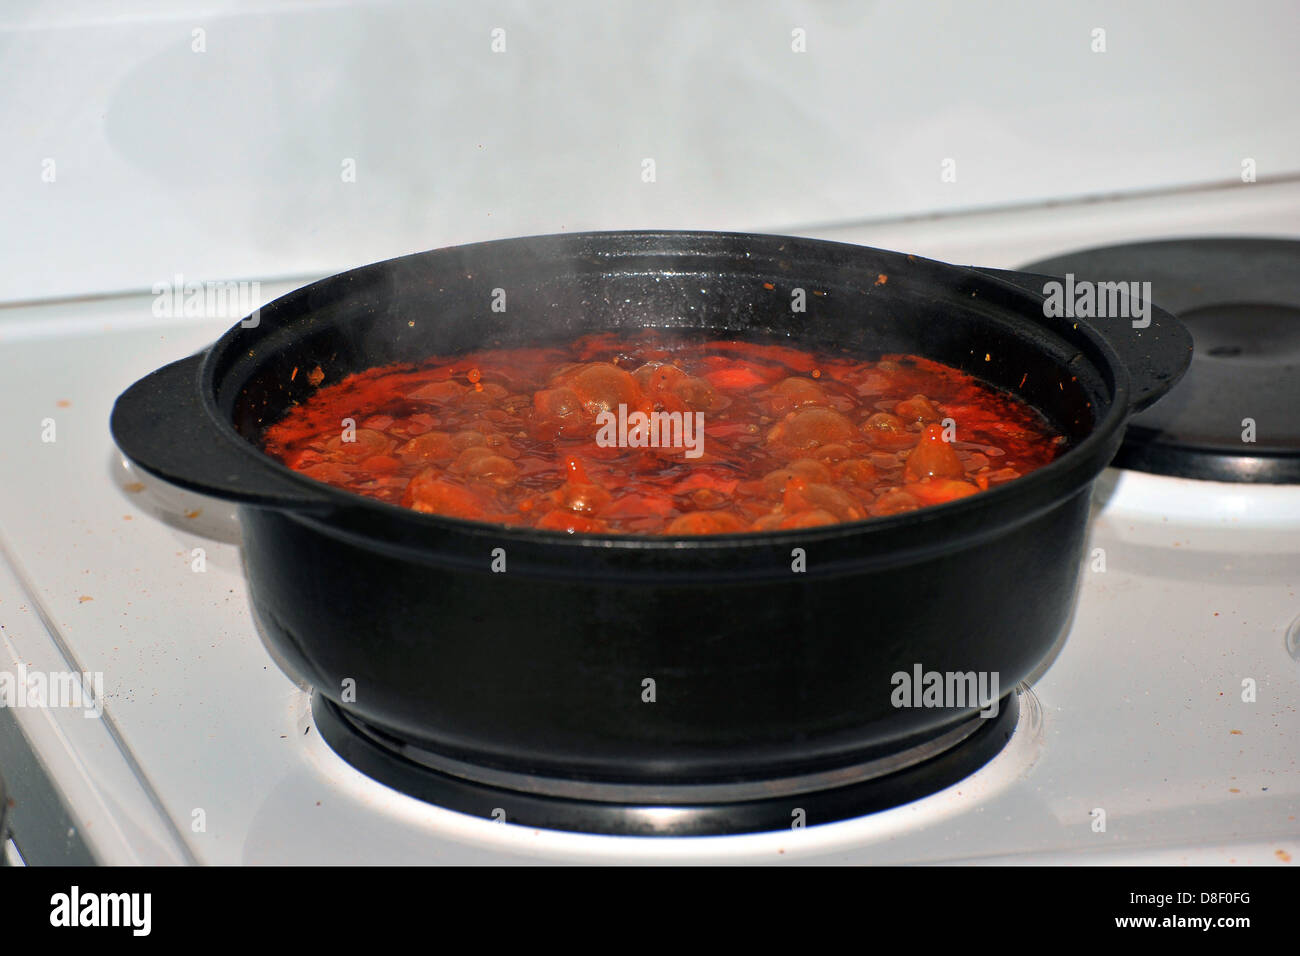 Images of a stew cooking in a cast iron pot on an electric cooker Stock ...